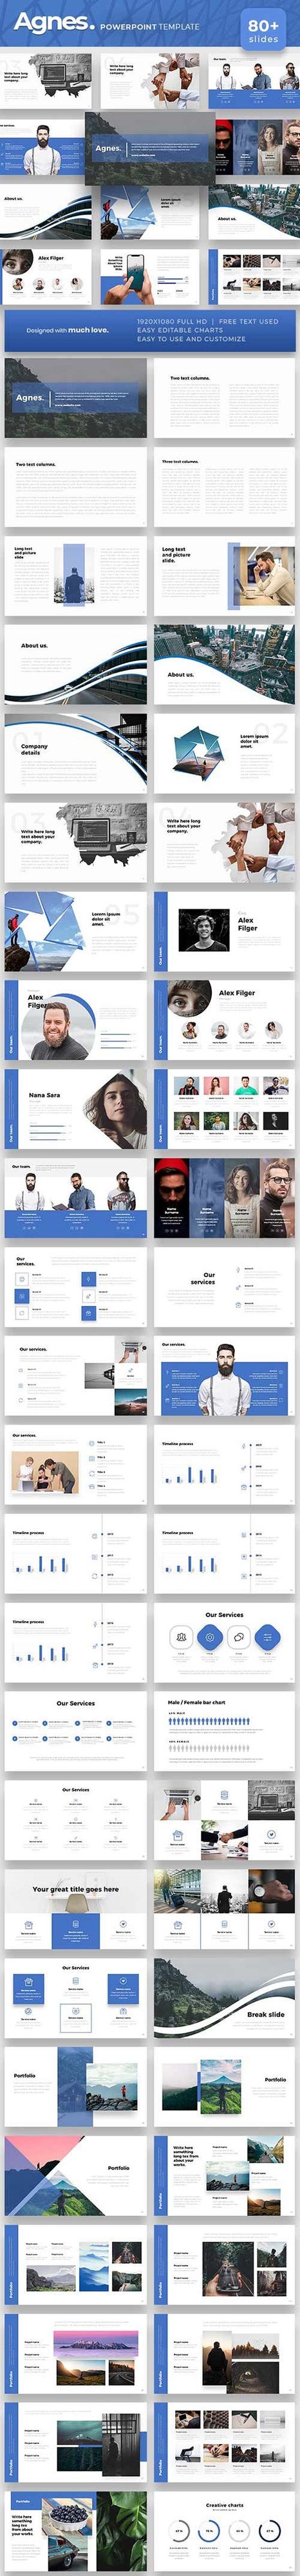 Agnes Powerpoint Template 23070296